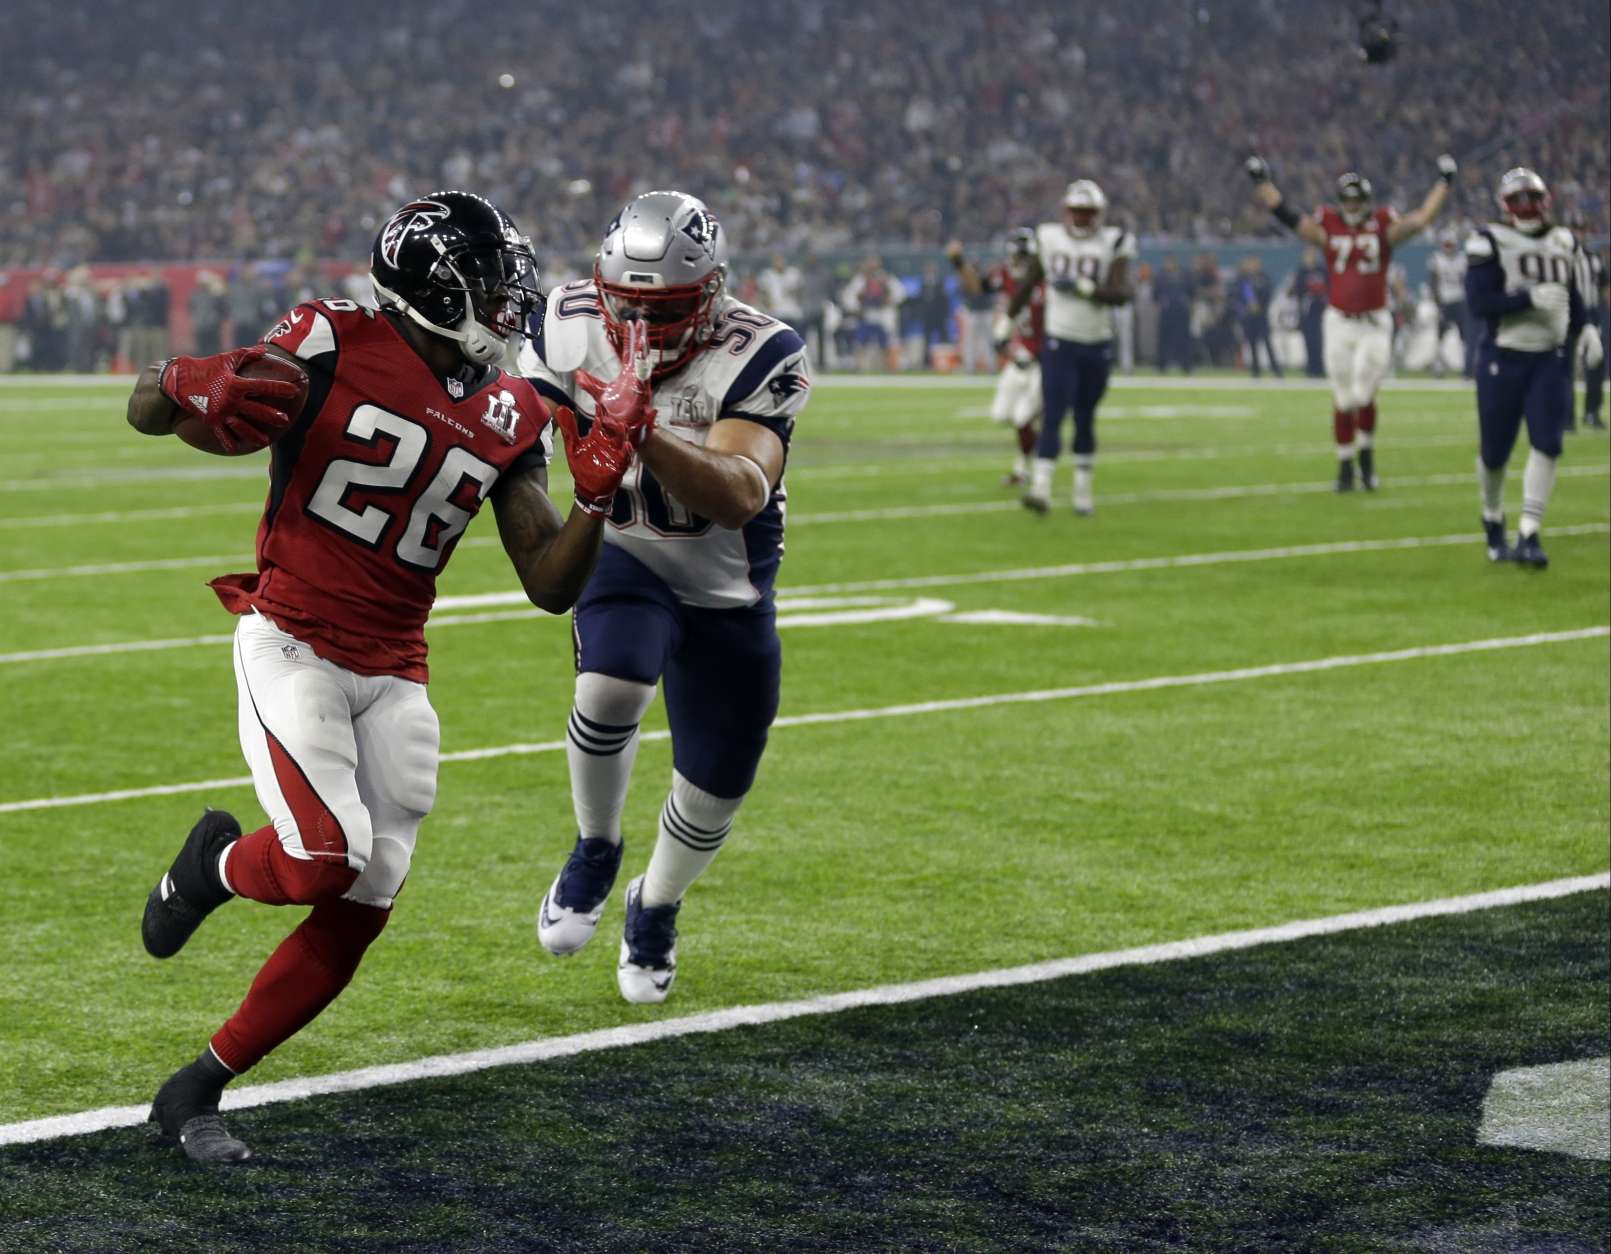 Atlanta Falcons' Tevin Coleman (26) runs to the end zone for a touchdown against New England Patriots' Rob Ninkovich (50) during the second half of the NFL Super Bowl 51 football game Sunday, Feb. 5, 2017, in Houston. (AP Photo/David J. Phillip)